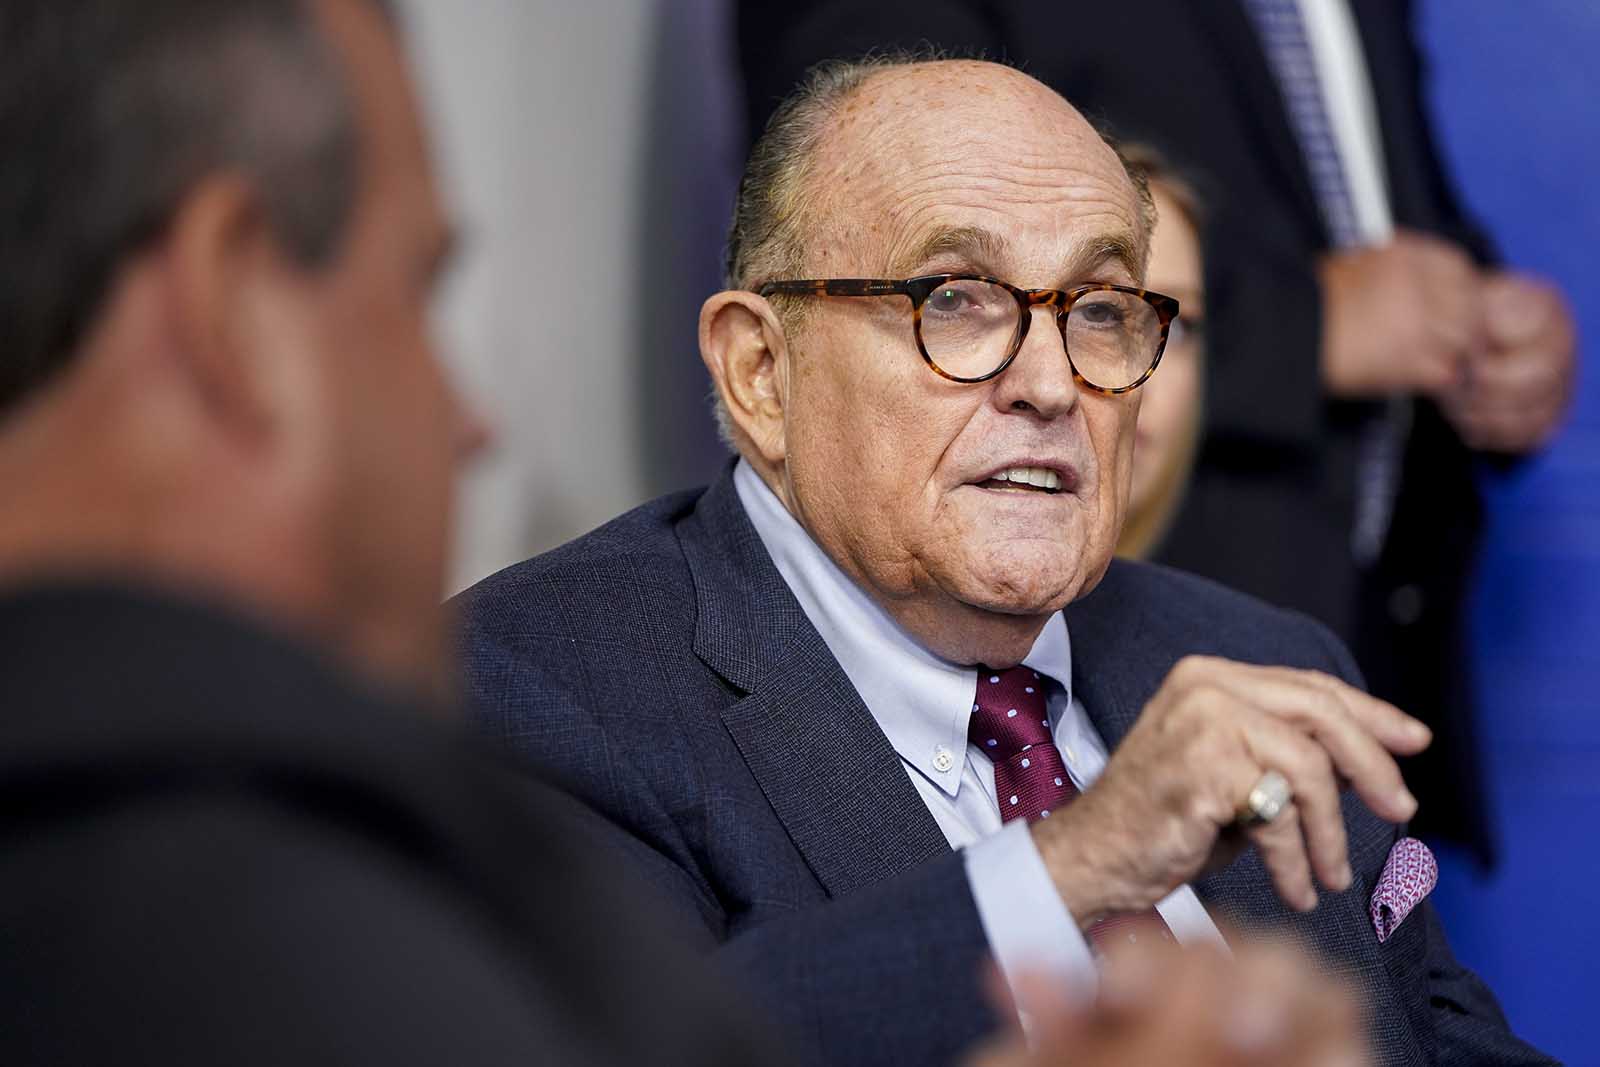 Former New York Mayor Rudy Giuliani speaks during a news conference held by  US President Donald Trump in the Briefing Room of the White House on September 27 in Washington.